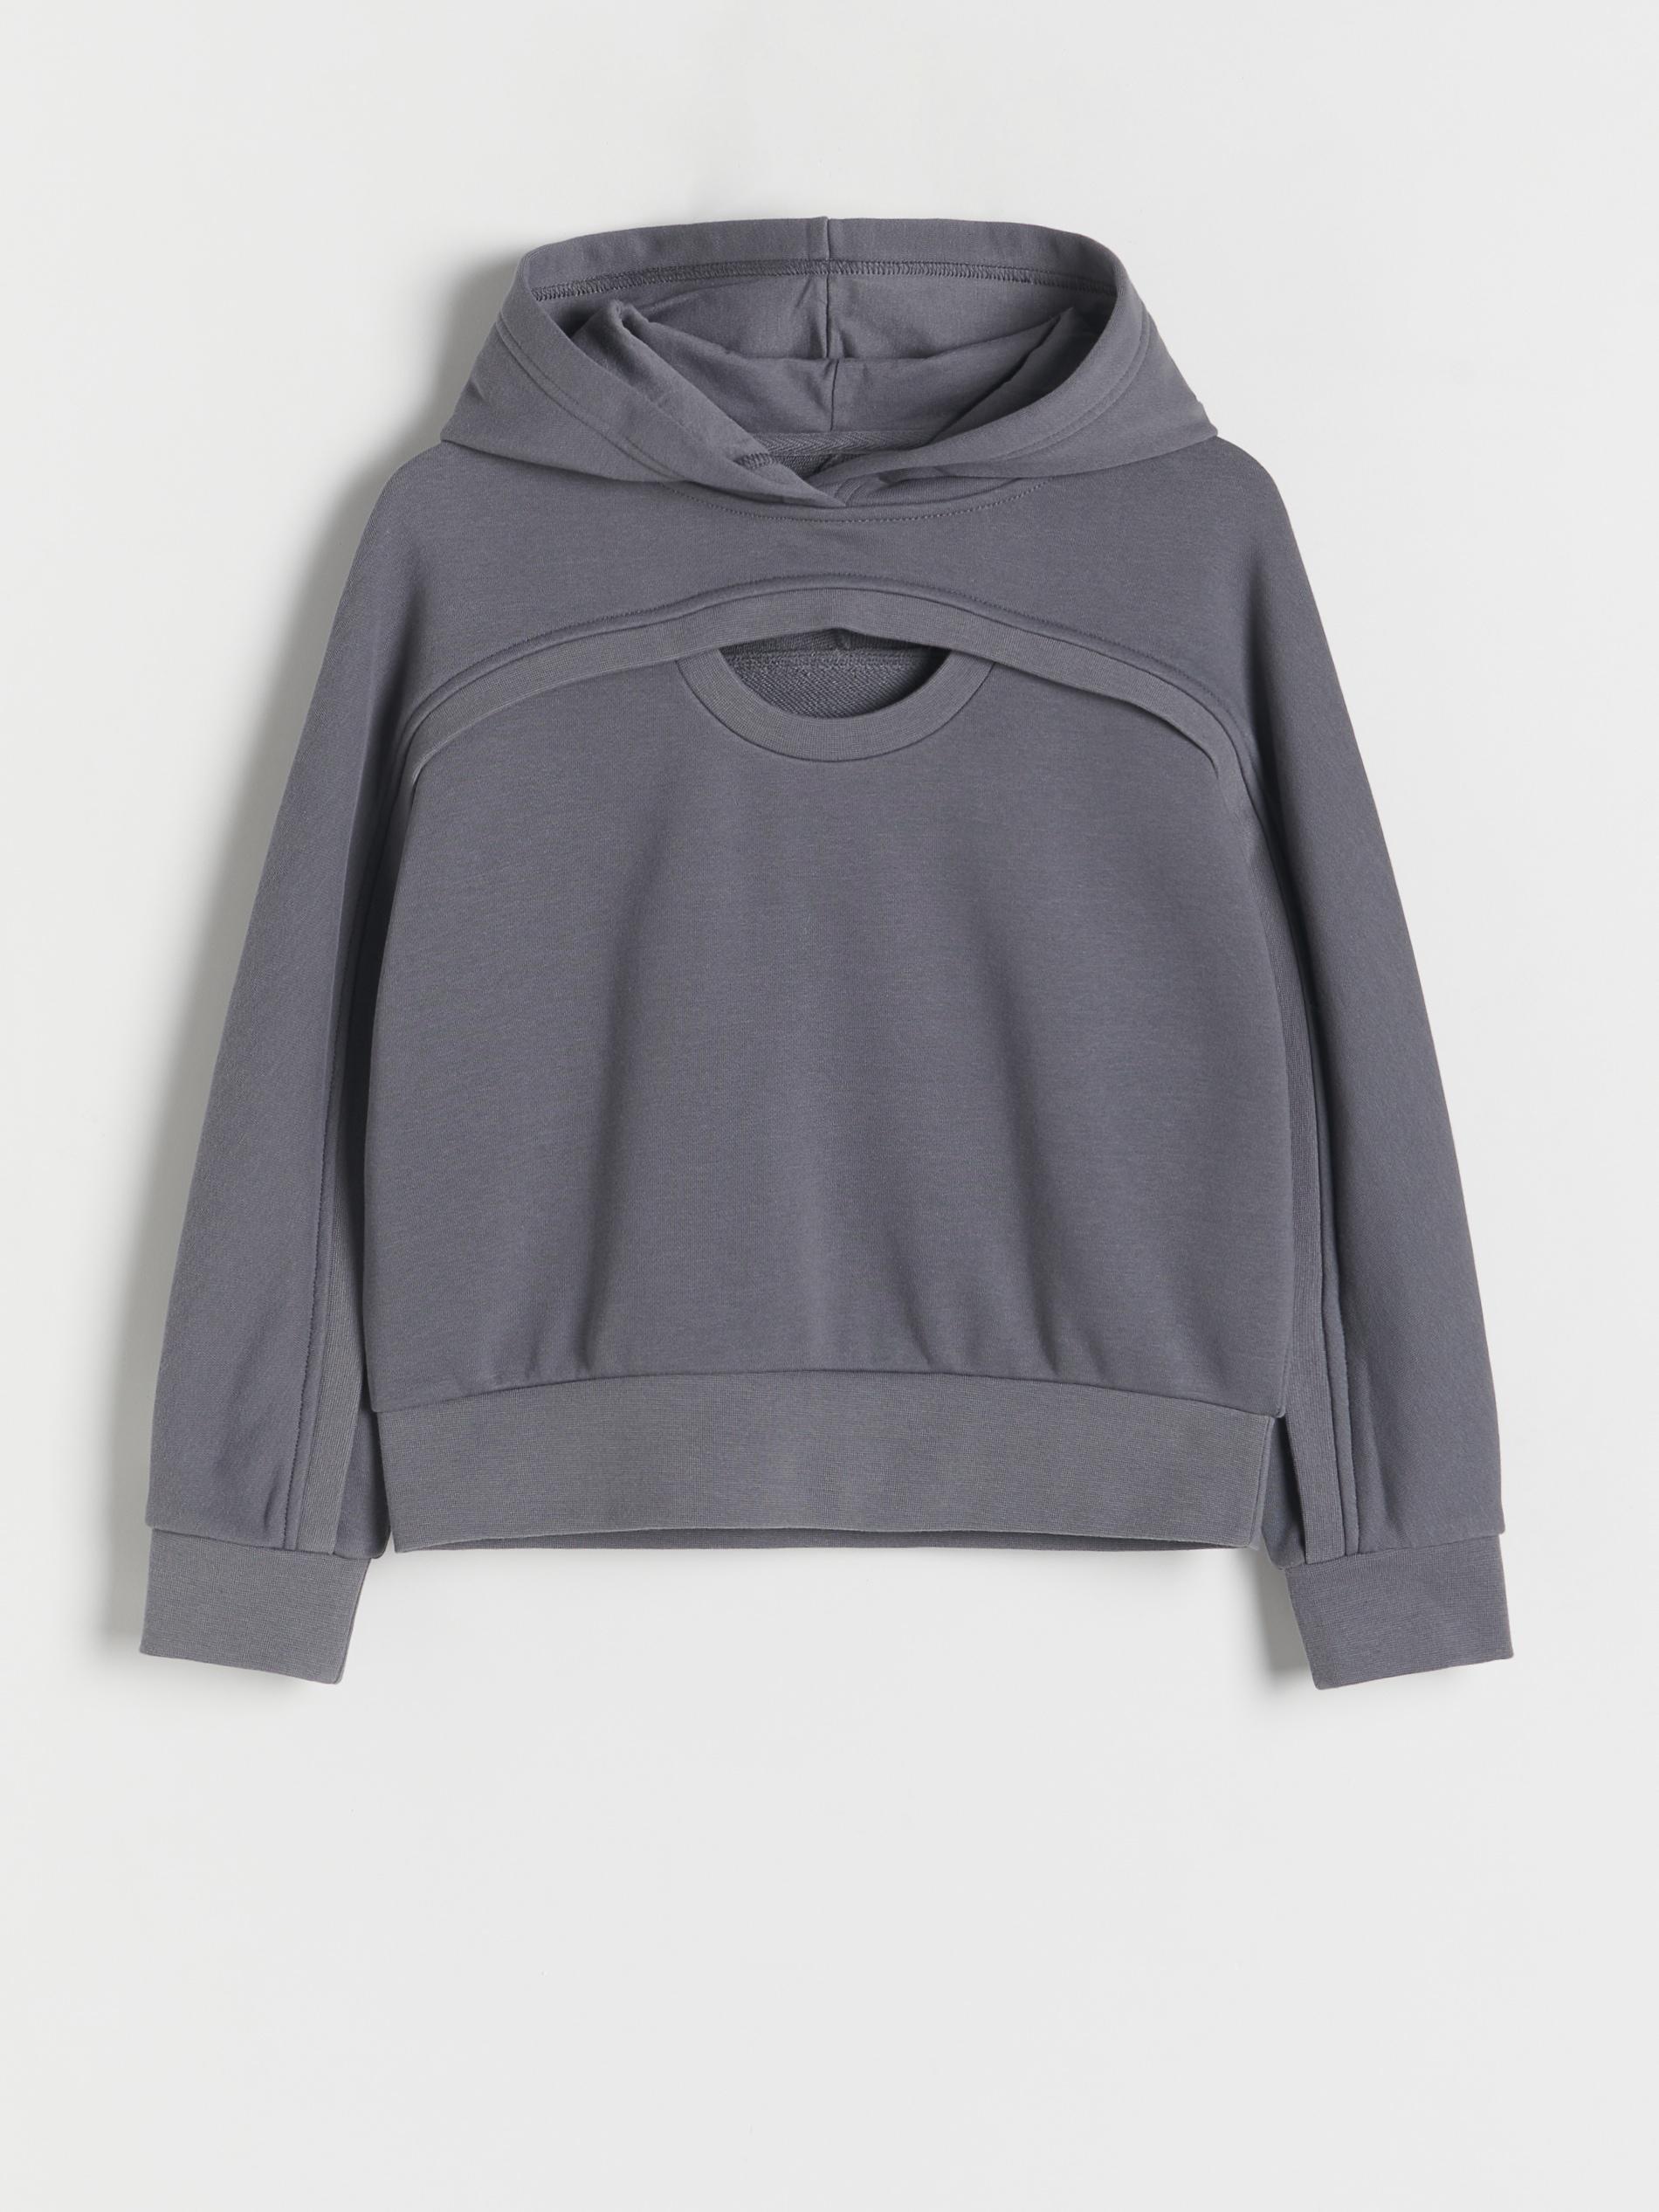 Reserved - Grey Hooded Sweater, Kids Girls